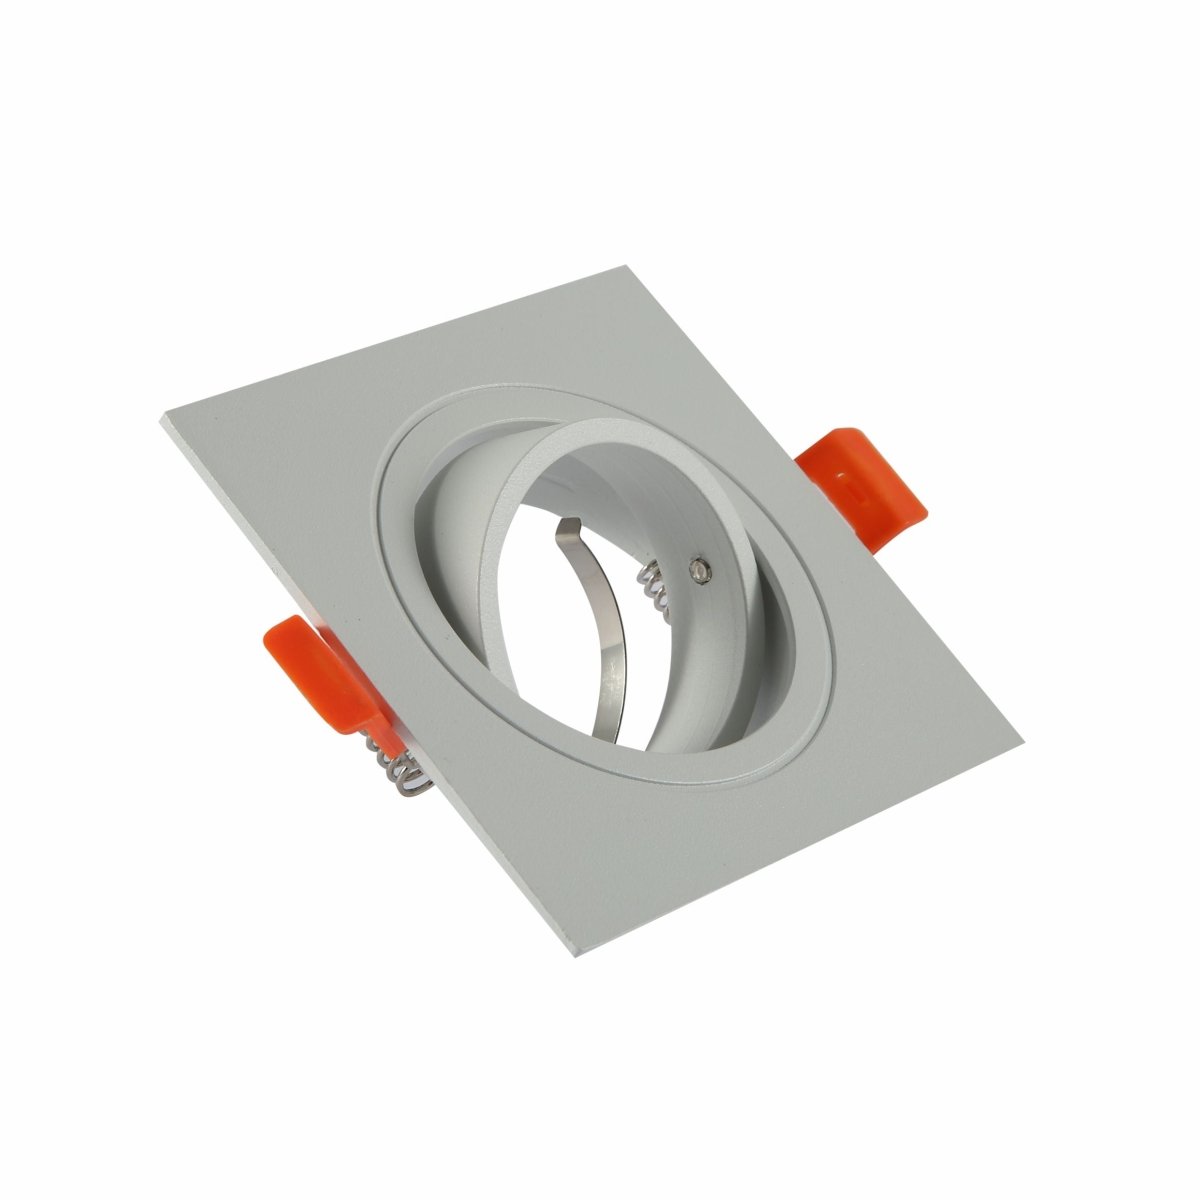 Main image of Square Recessed Tilt Downlight White with GU10 Fitting | TEKLED 165-03884